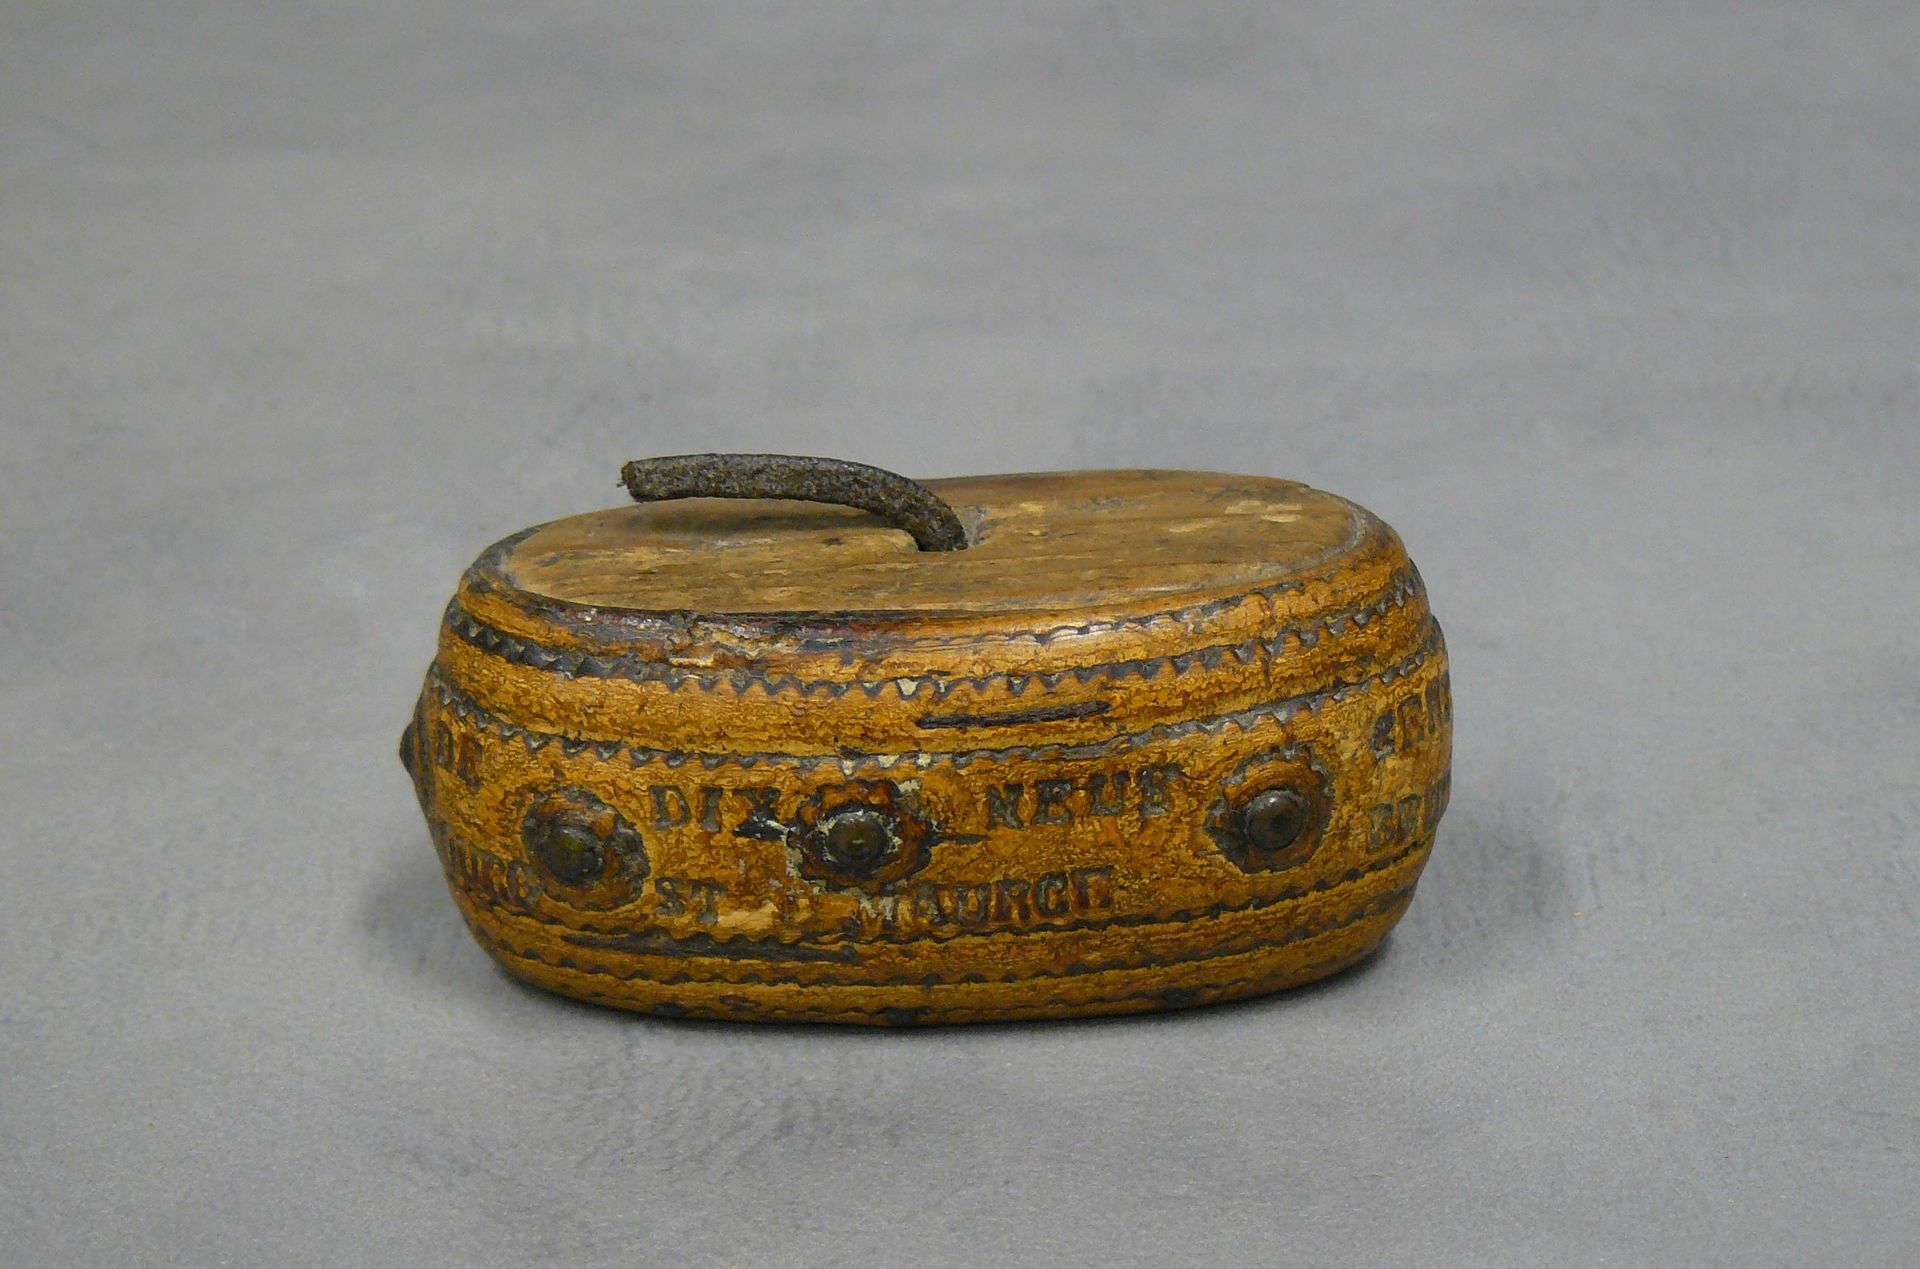 Brunod Joconde a wooden snuffbox, engraved, dated and marked : souvenir of ninet&hellip;